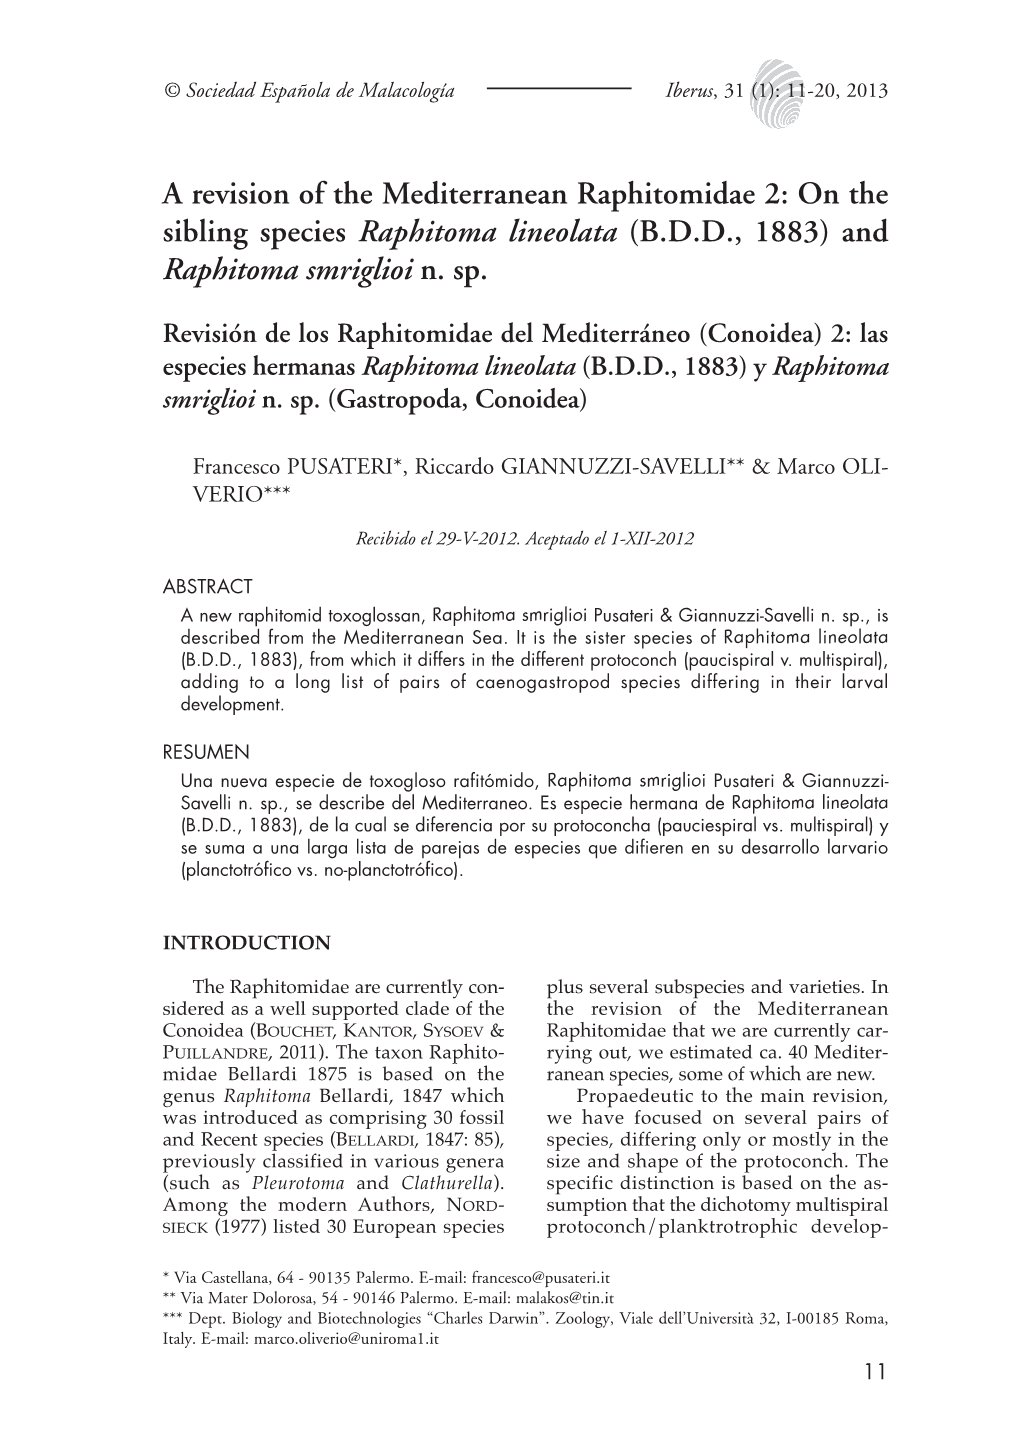 On the Sibling Species Raphitoma Lineolata (B.D.D., 1883) and Raphitoma Smriglioi N